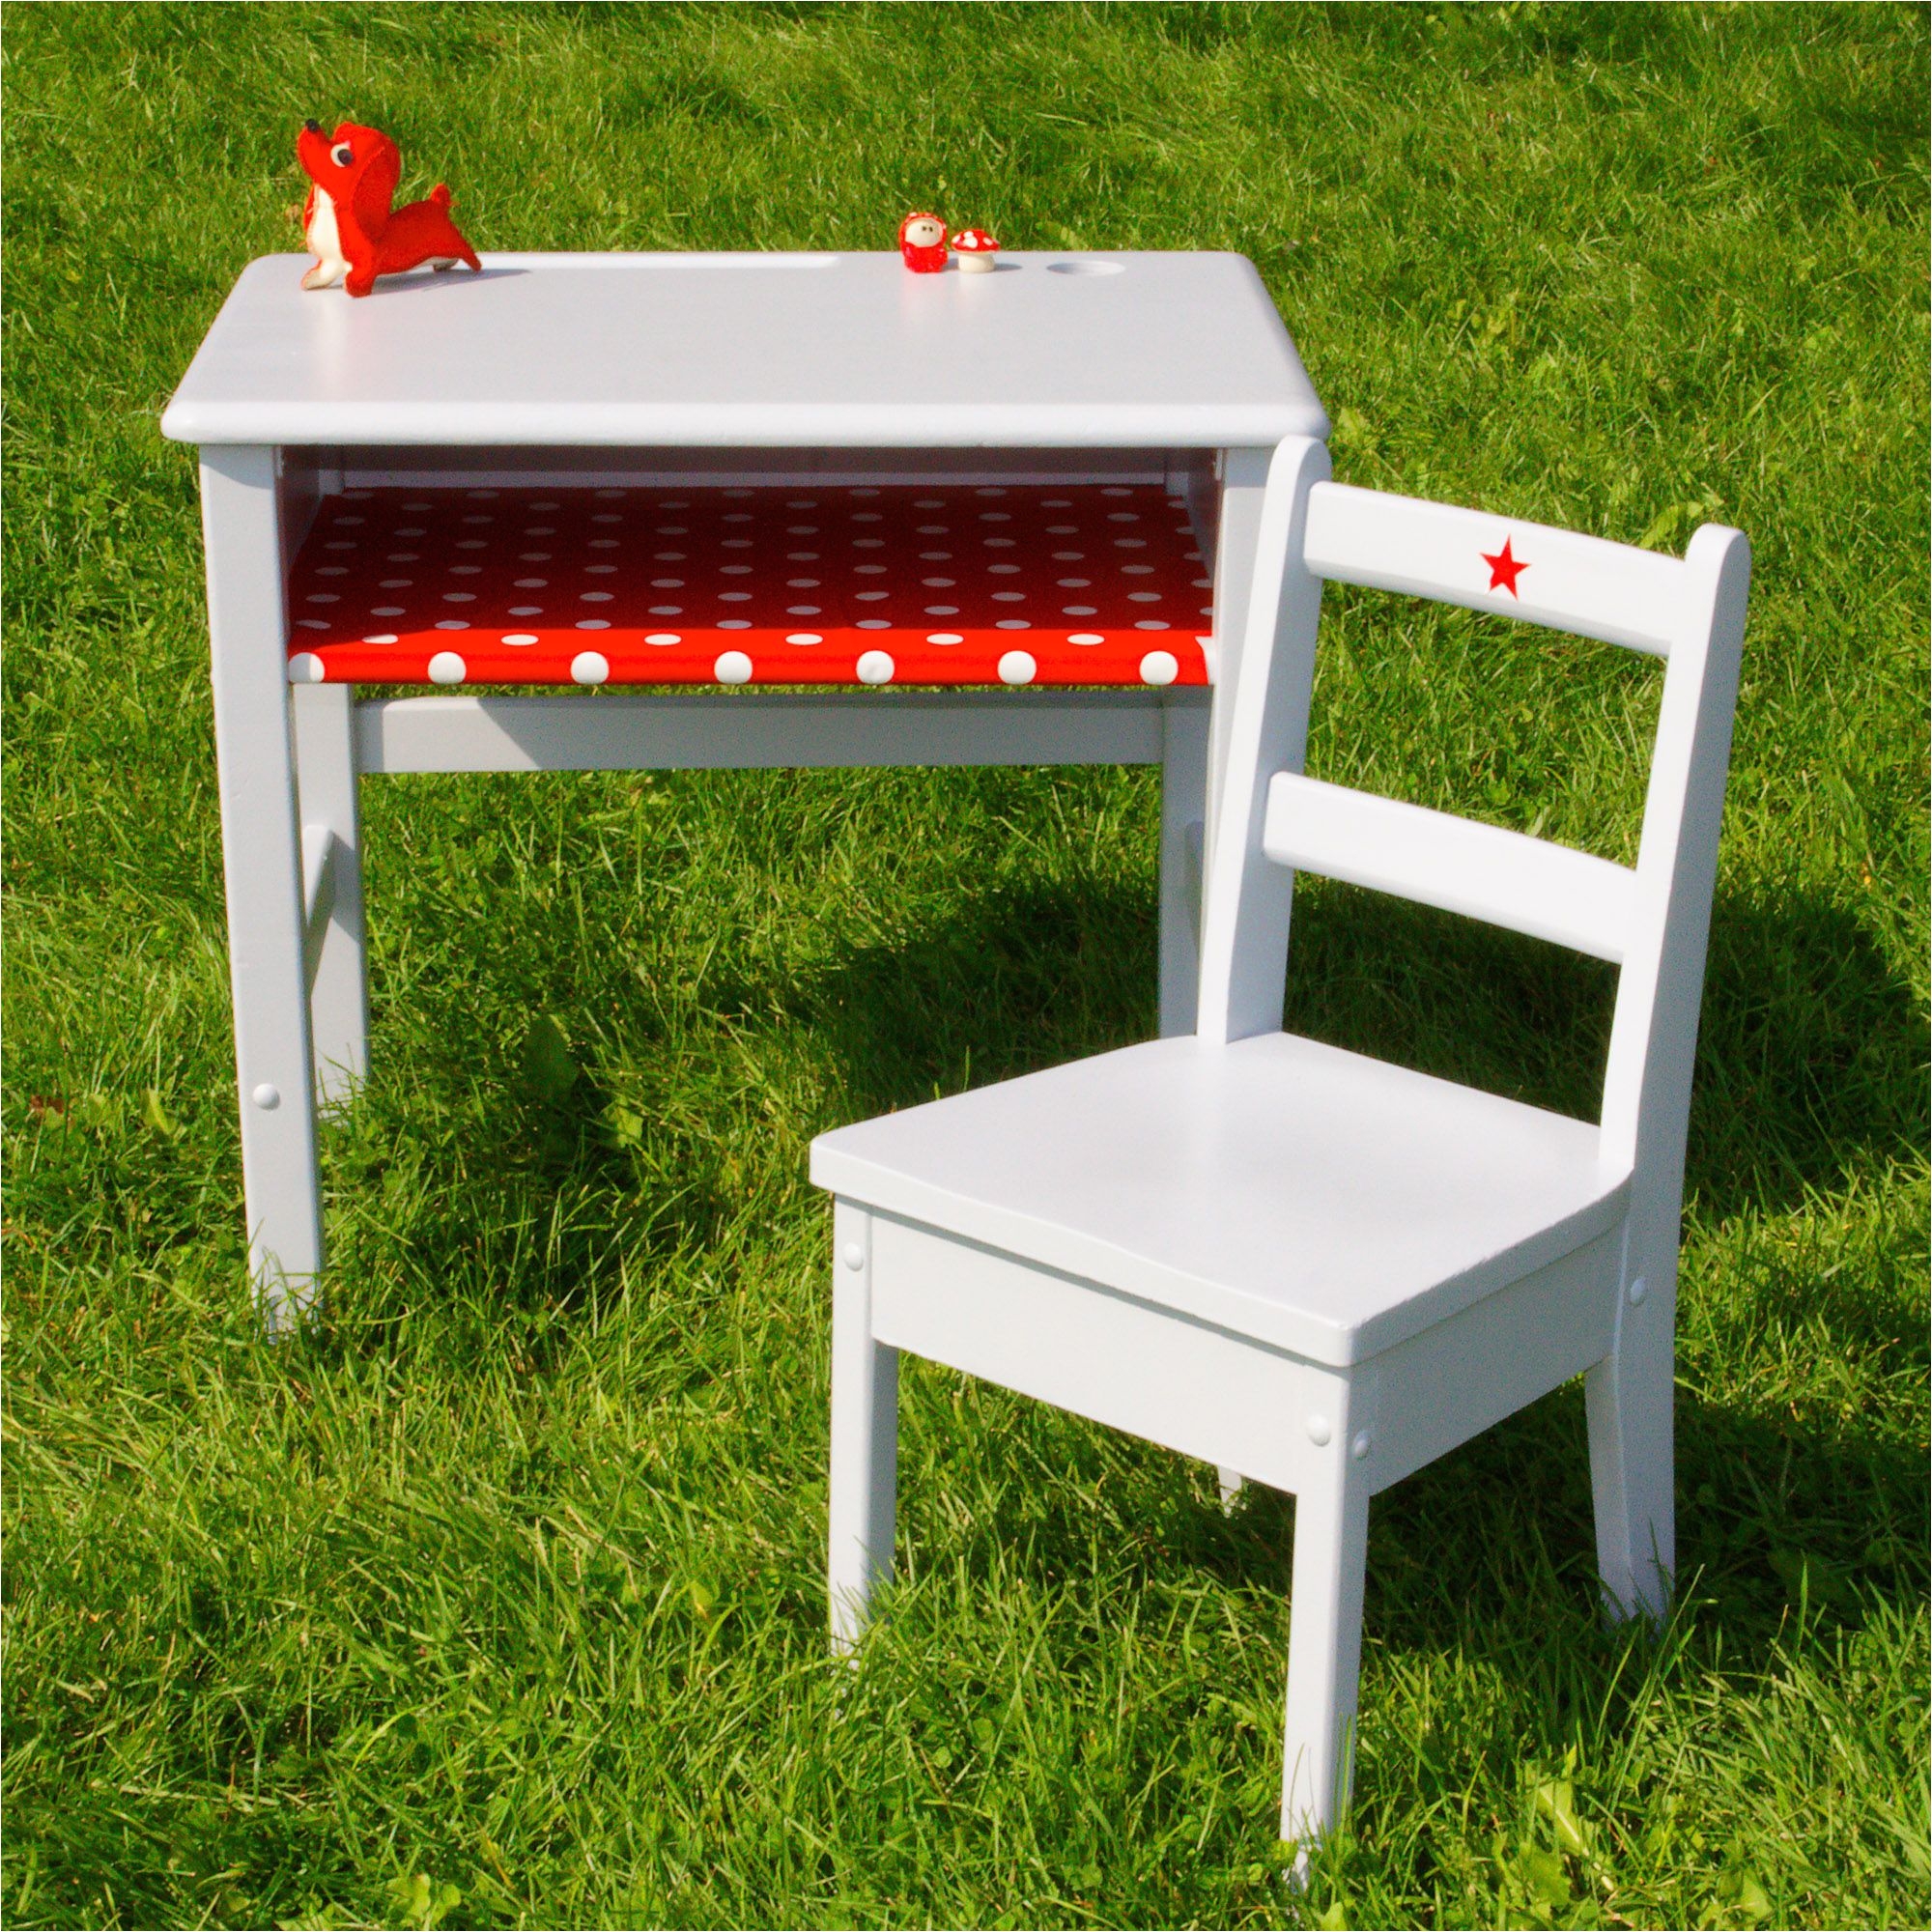 Small Plastic Table and Chairs for toddlers How to Paint A School Desk Pupitres and Desks Un Lapin Dans Le